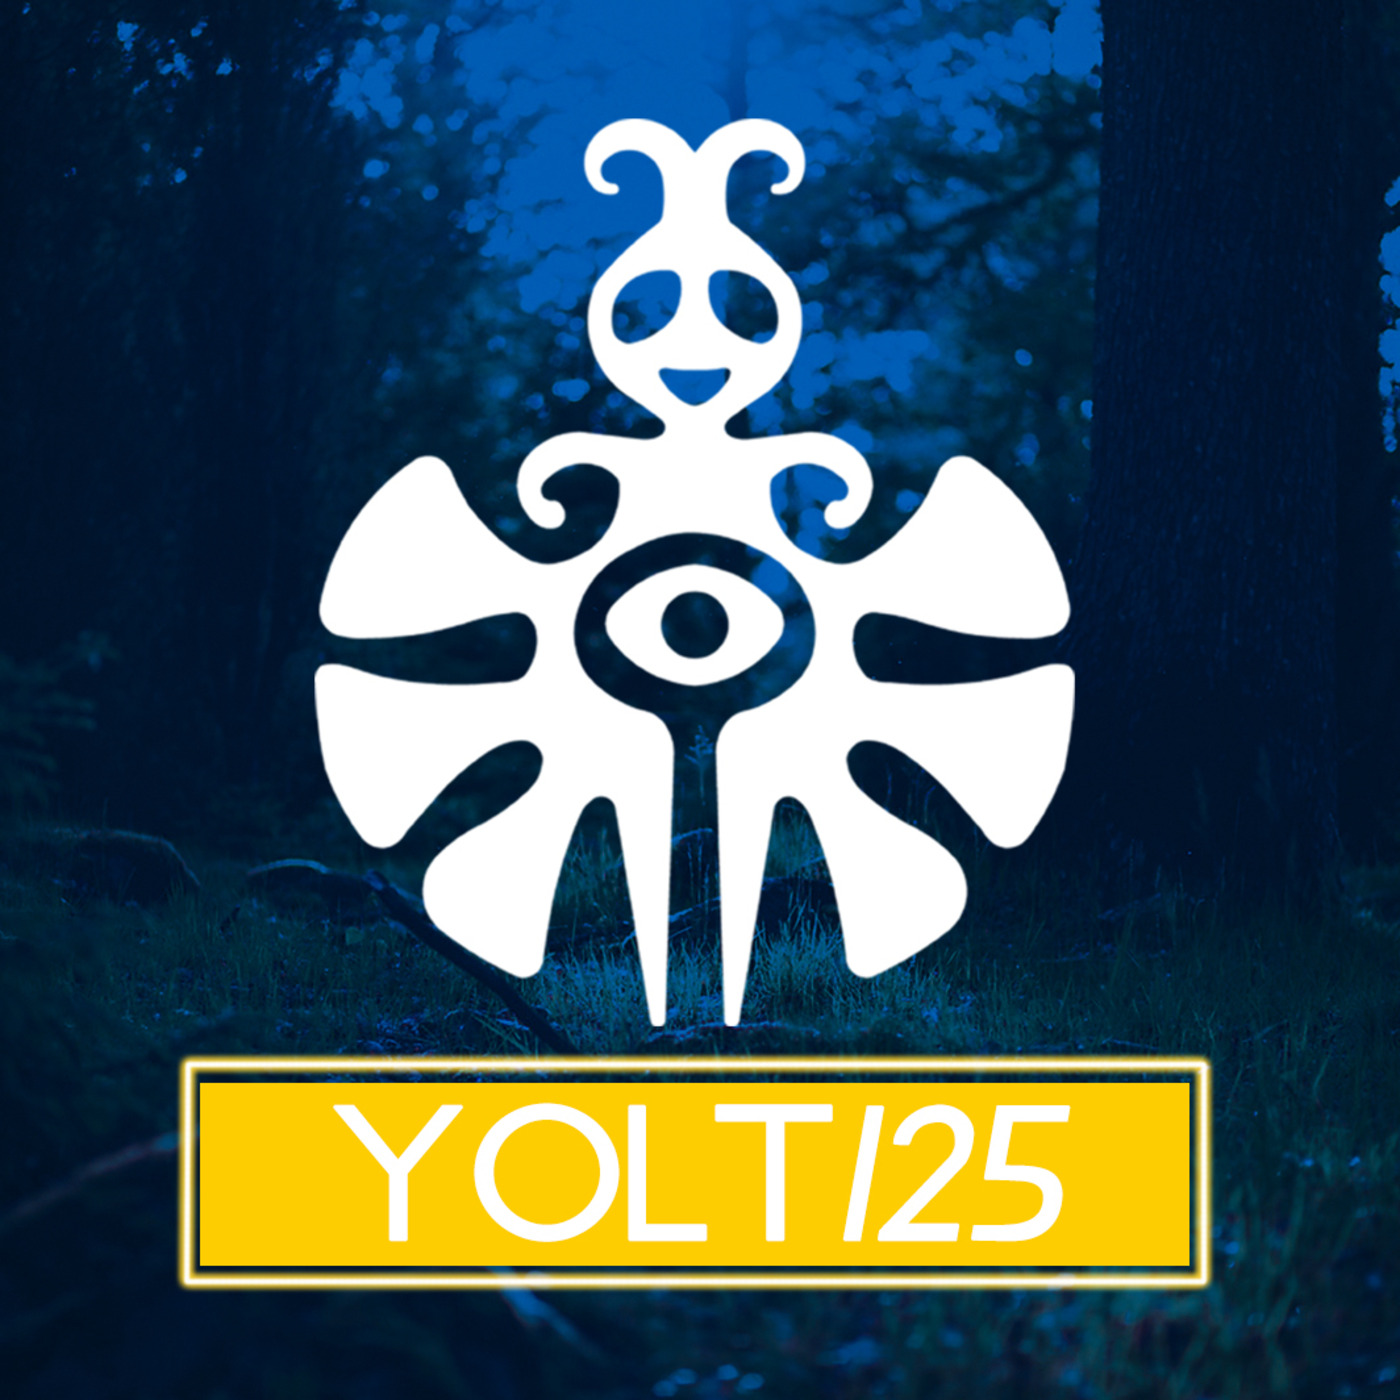 You Only Live Trance Episode 125 (#YOLT125) - Ness